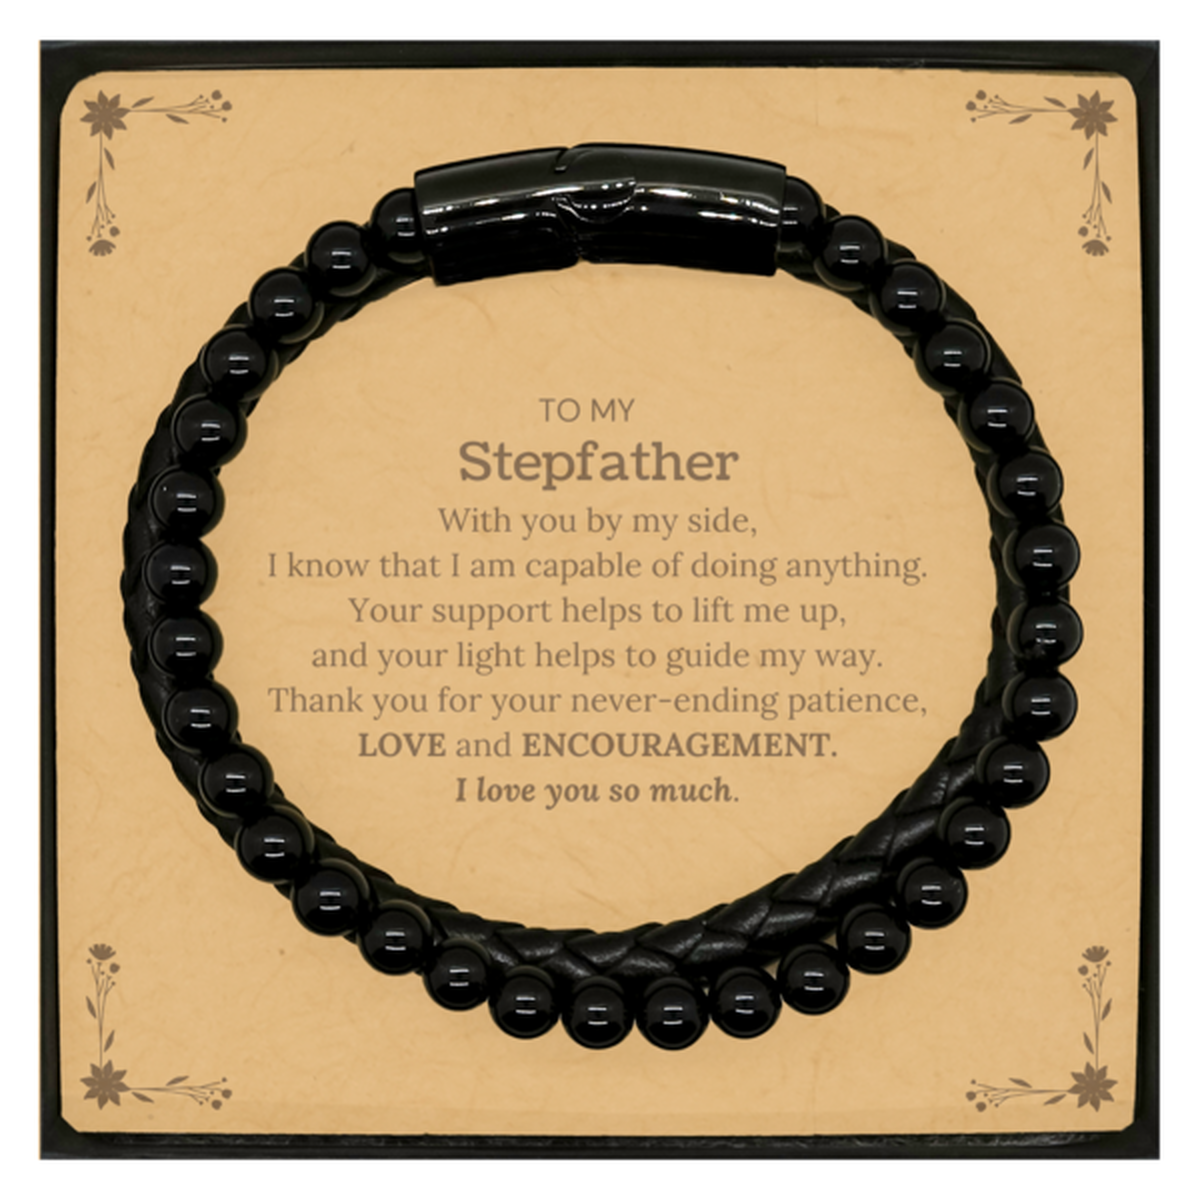 Appreciation Stepfather Stone Leather Bracelets Gifts, To My Stepfather Birthday Christmas Wedding Keepsake Gifts for Stepfather With you by my side, I know that I am capable of doing anything. I love you so much